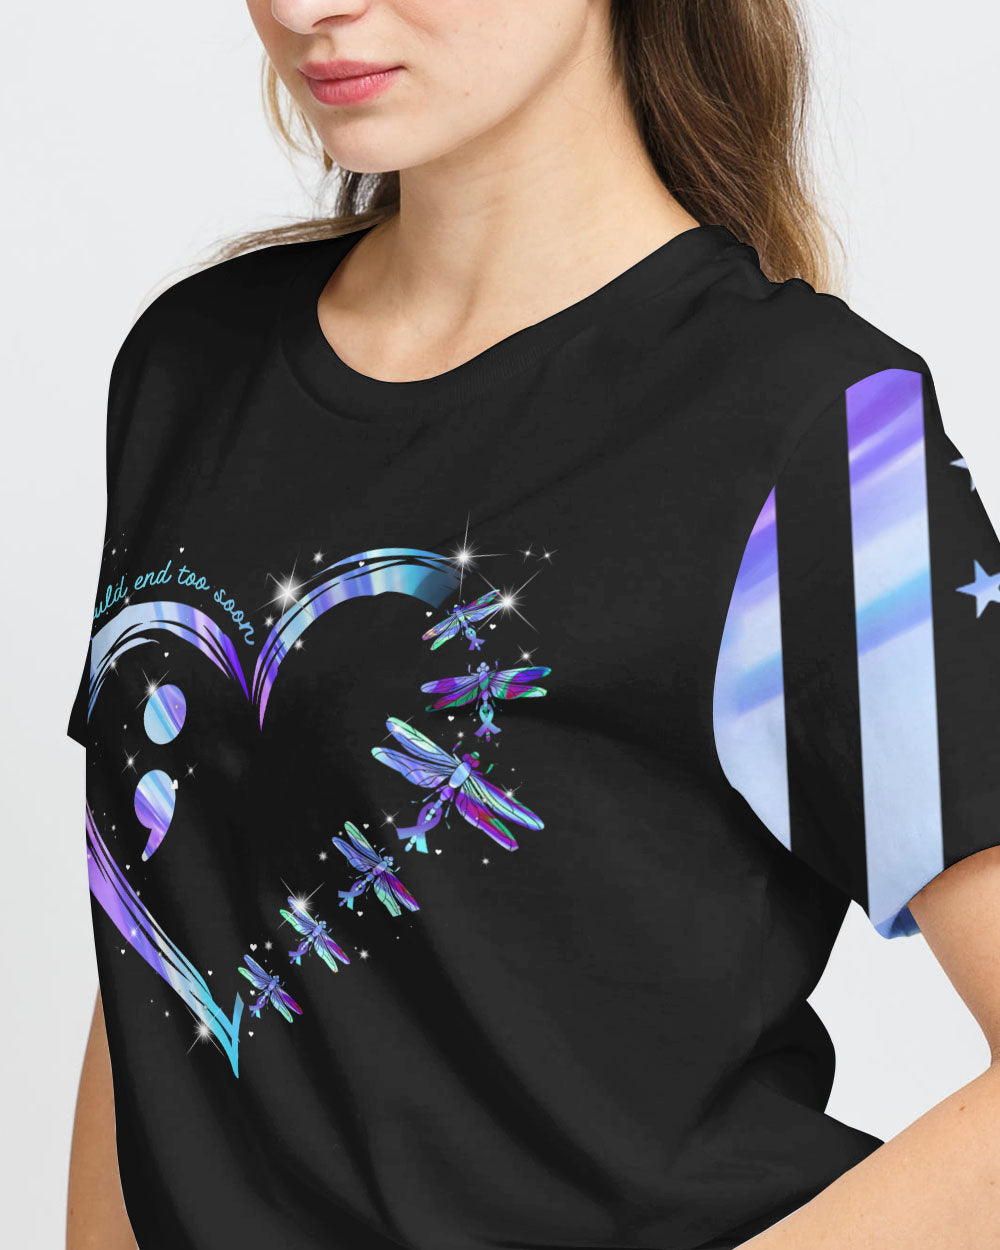 Dragonfly Fight Holographic Flag Women's Suicide Prevention Awareness Tshirt